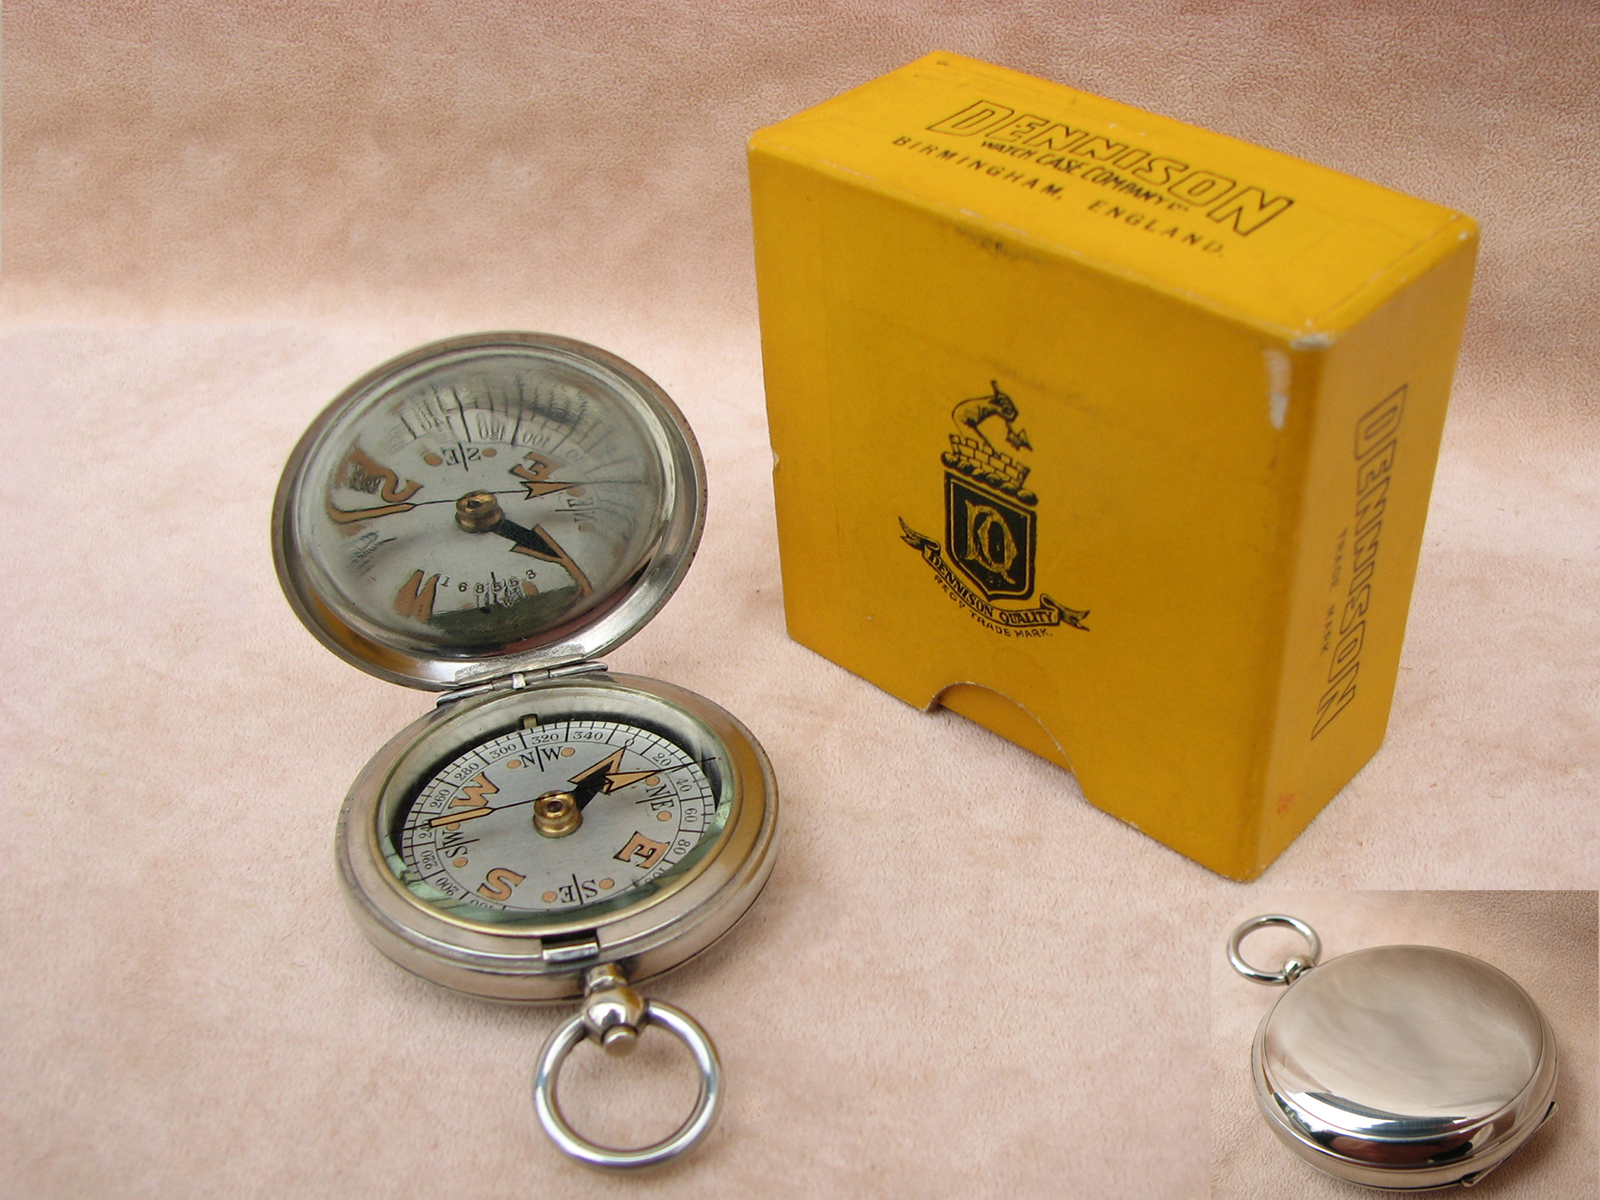 Iconic WW1 Dennison Officers compass in original branded box